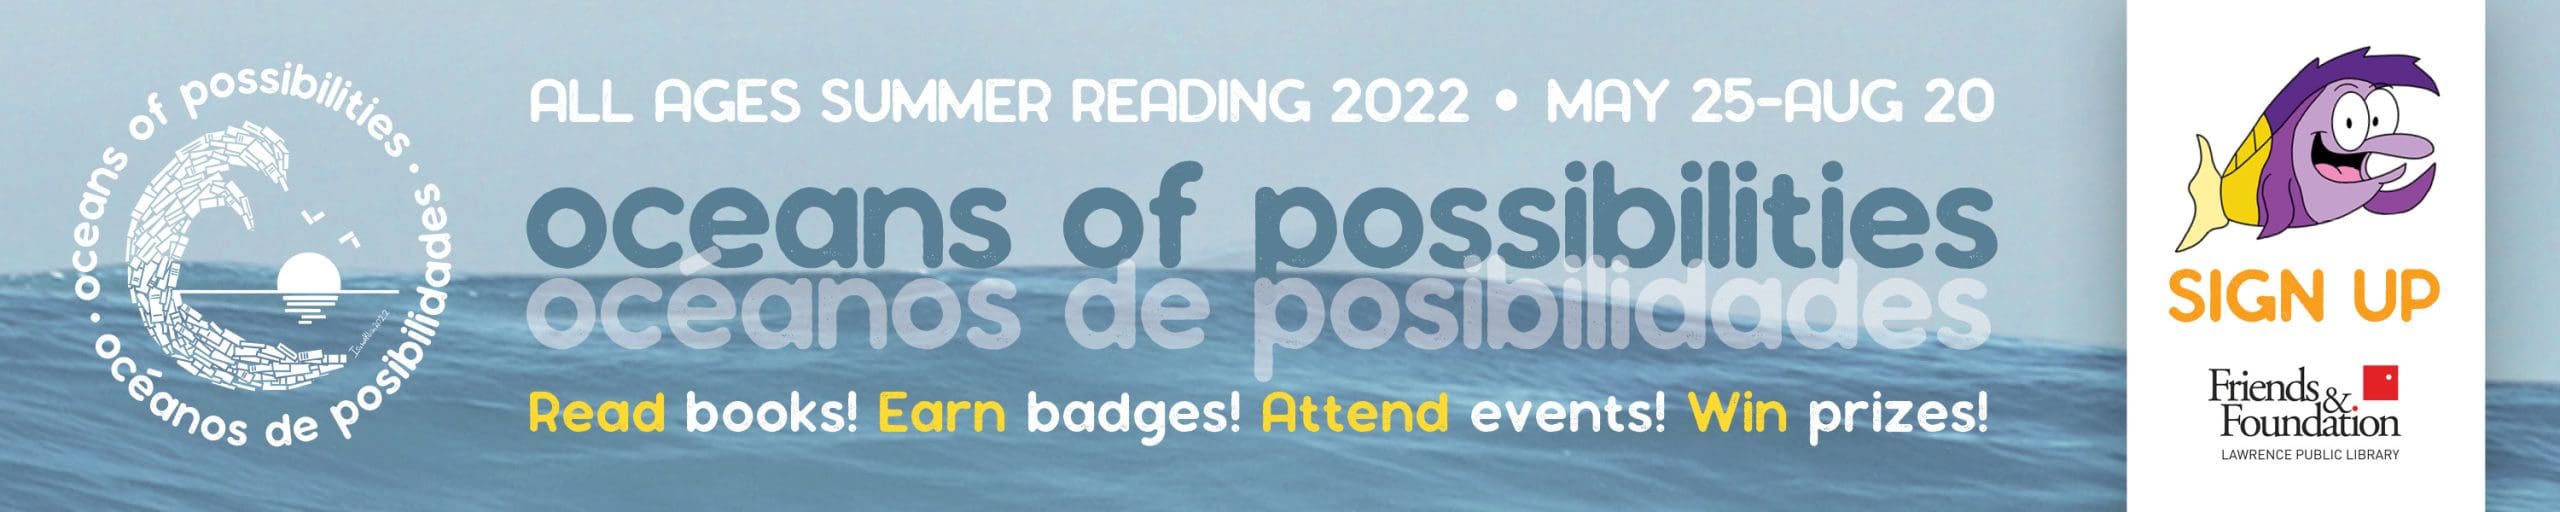 All ages Summer Reading 2022 runs May 25-Aug 20. Our theme is "oceans of possibilities" and the challenge is to read 10 books to win prizes! We also have themed events all summer, too. Click image to sign up!